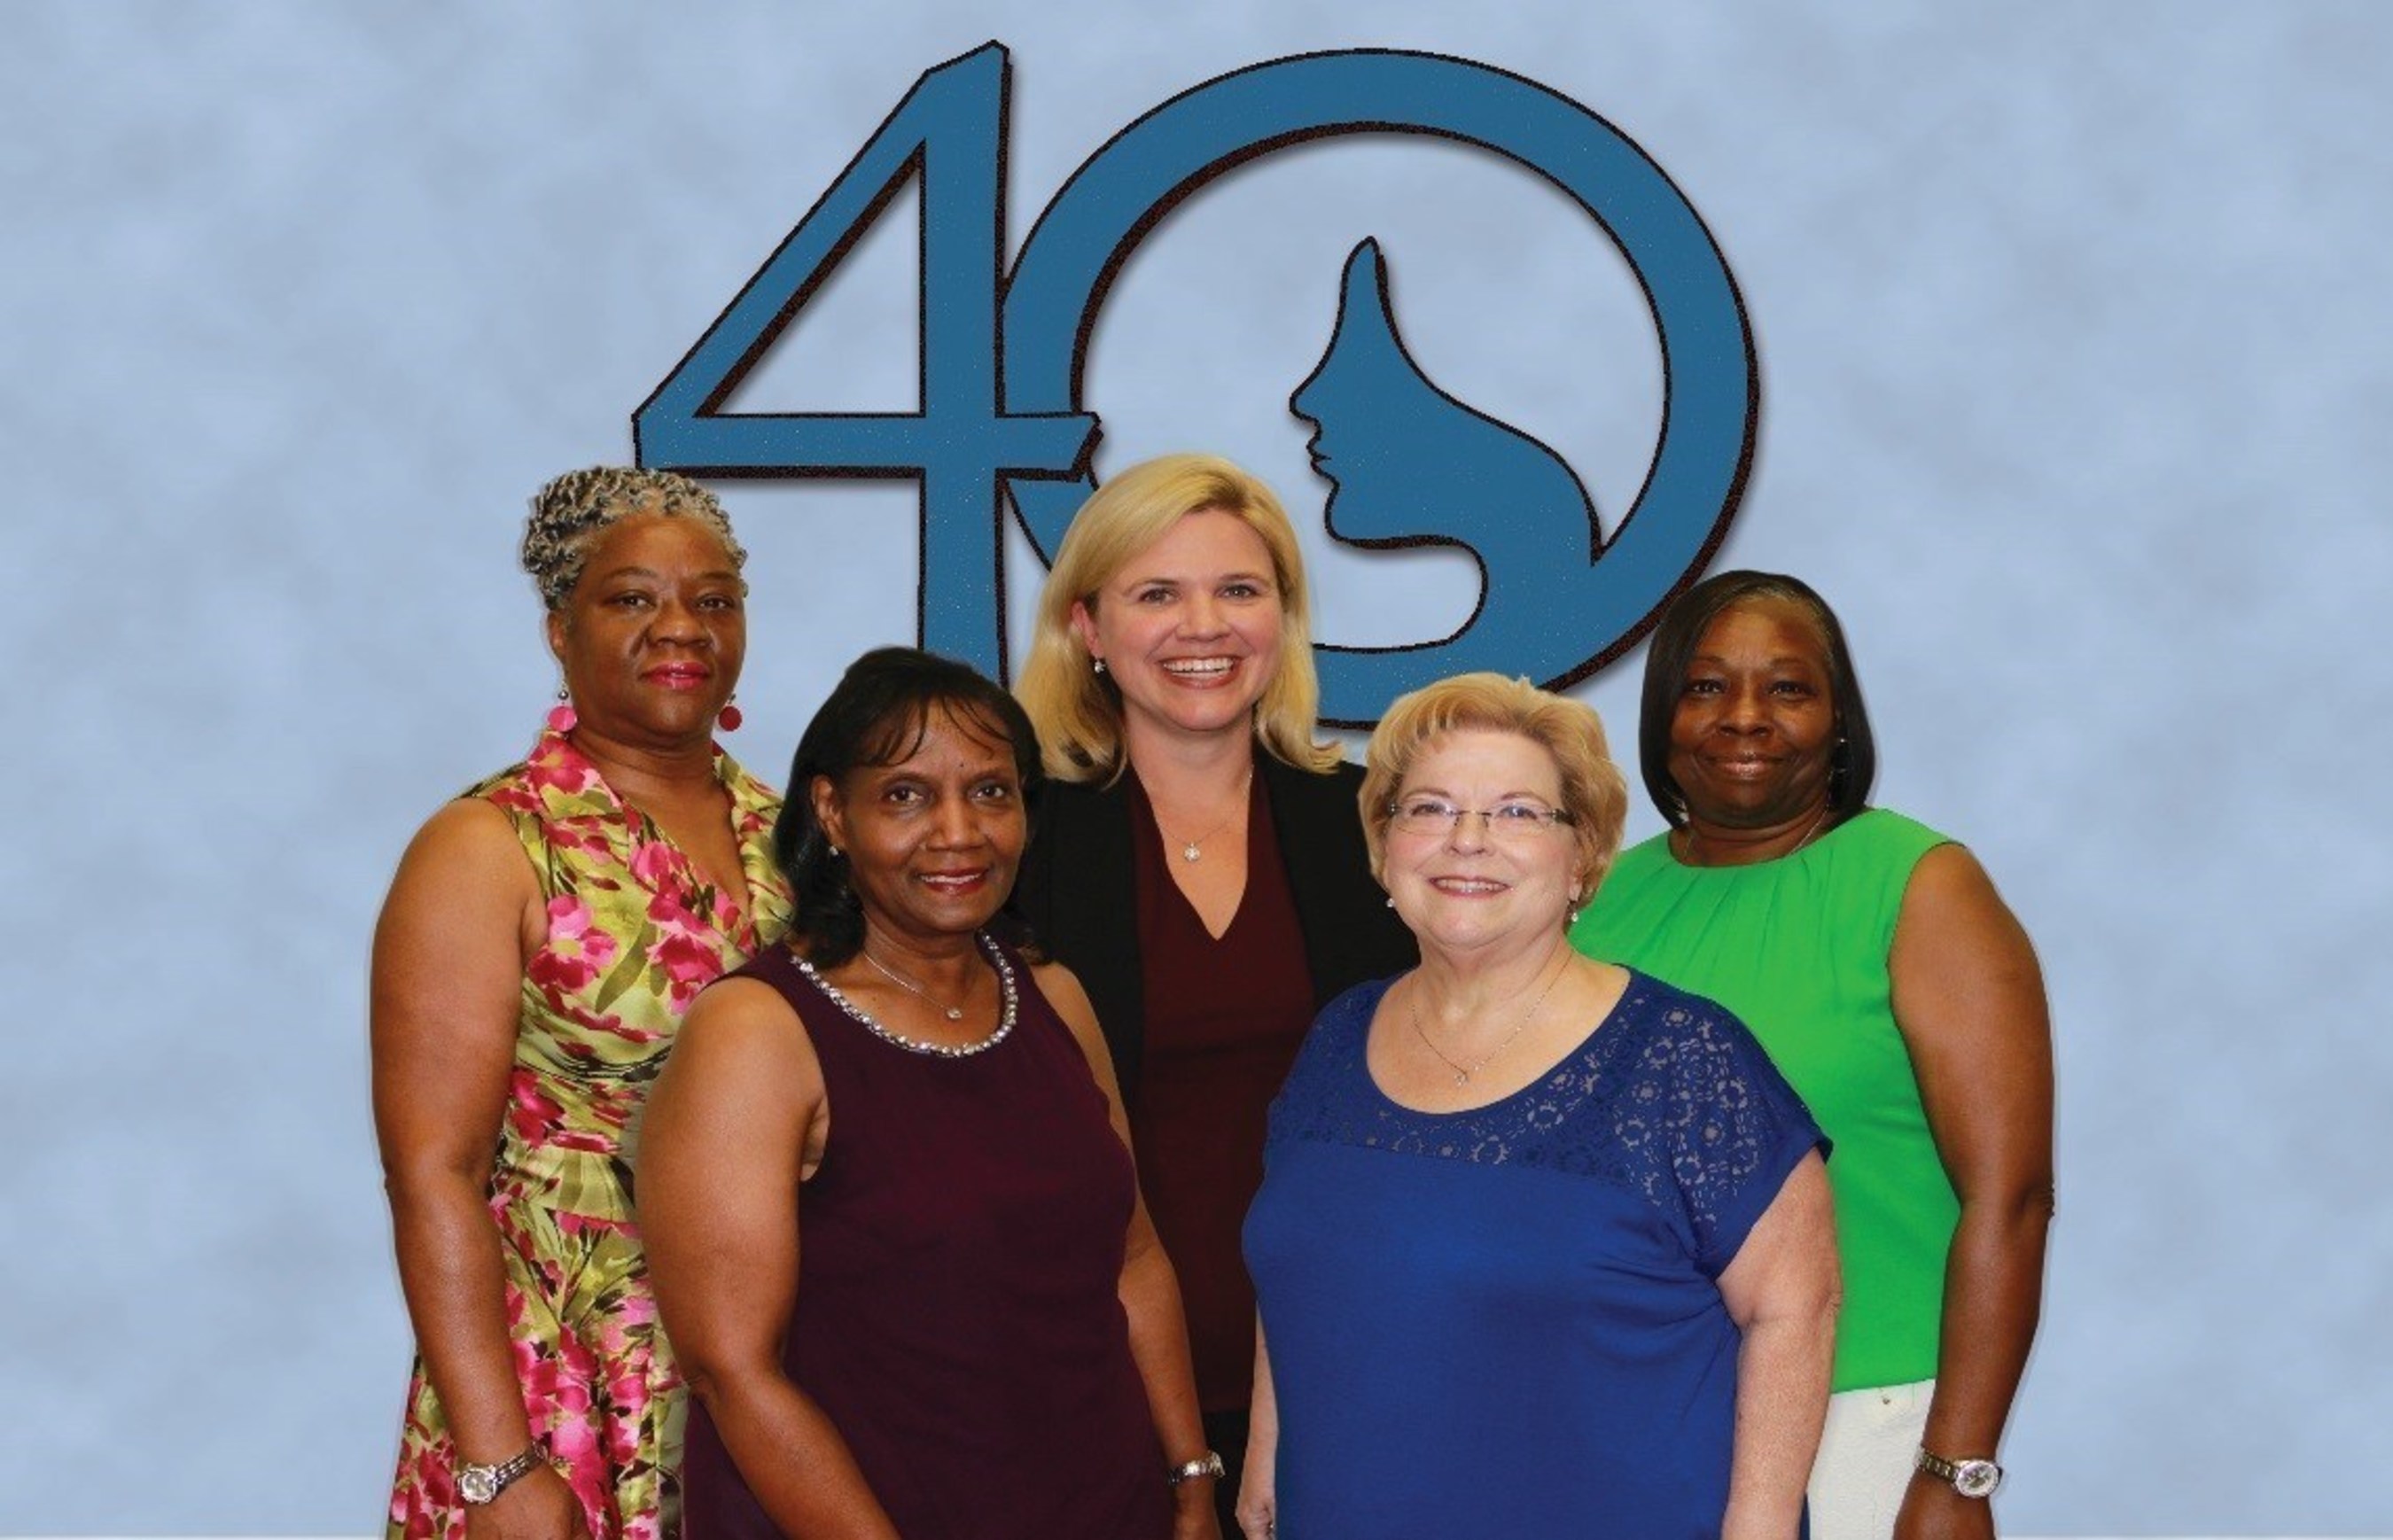 (Back Row, Left to Right) Surgical Technician Bobbie Hall Brown Hall, CEO Ashley McClellan, Labor and Delivery Unit Secretary Katherine Howard, (Front Row, Left To Right) Pre Surgical Testing Nurse Linda Washington, and Operating Room Nurse Carla Tehranchi of The Woman's Hospital of Texas. Ashley McClellan congratulates staff that began their careers at The Woman's Hospital of Texas 40 years ago.